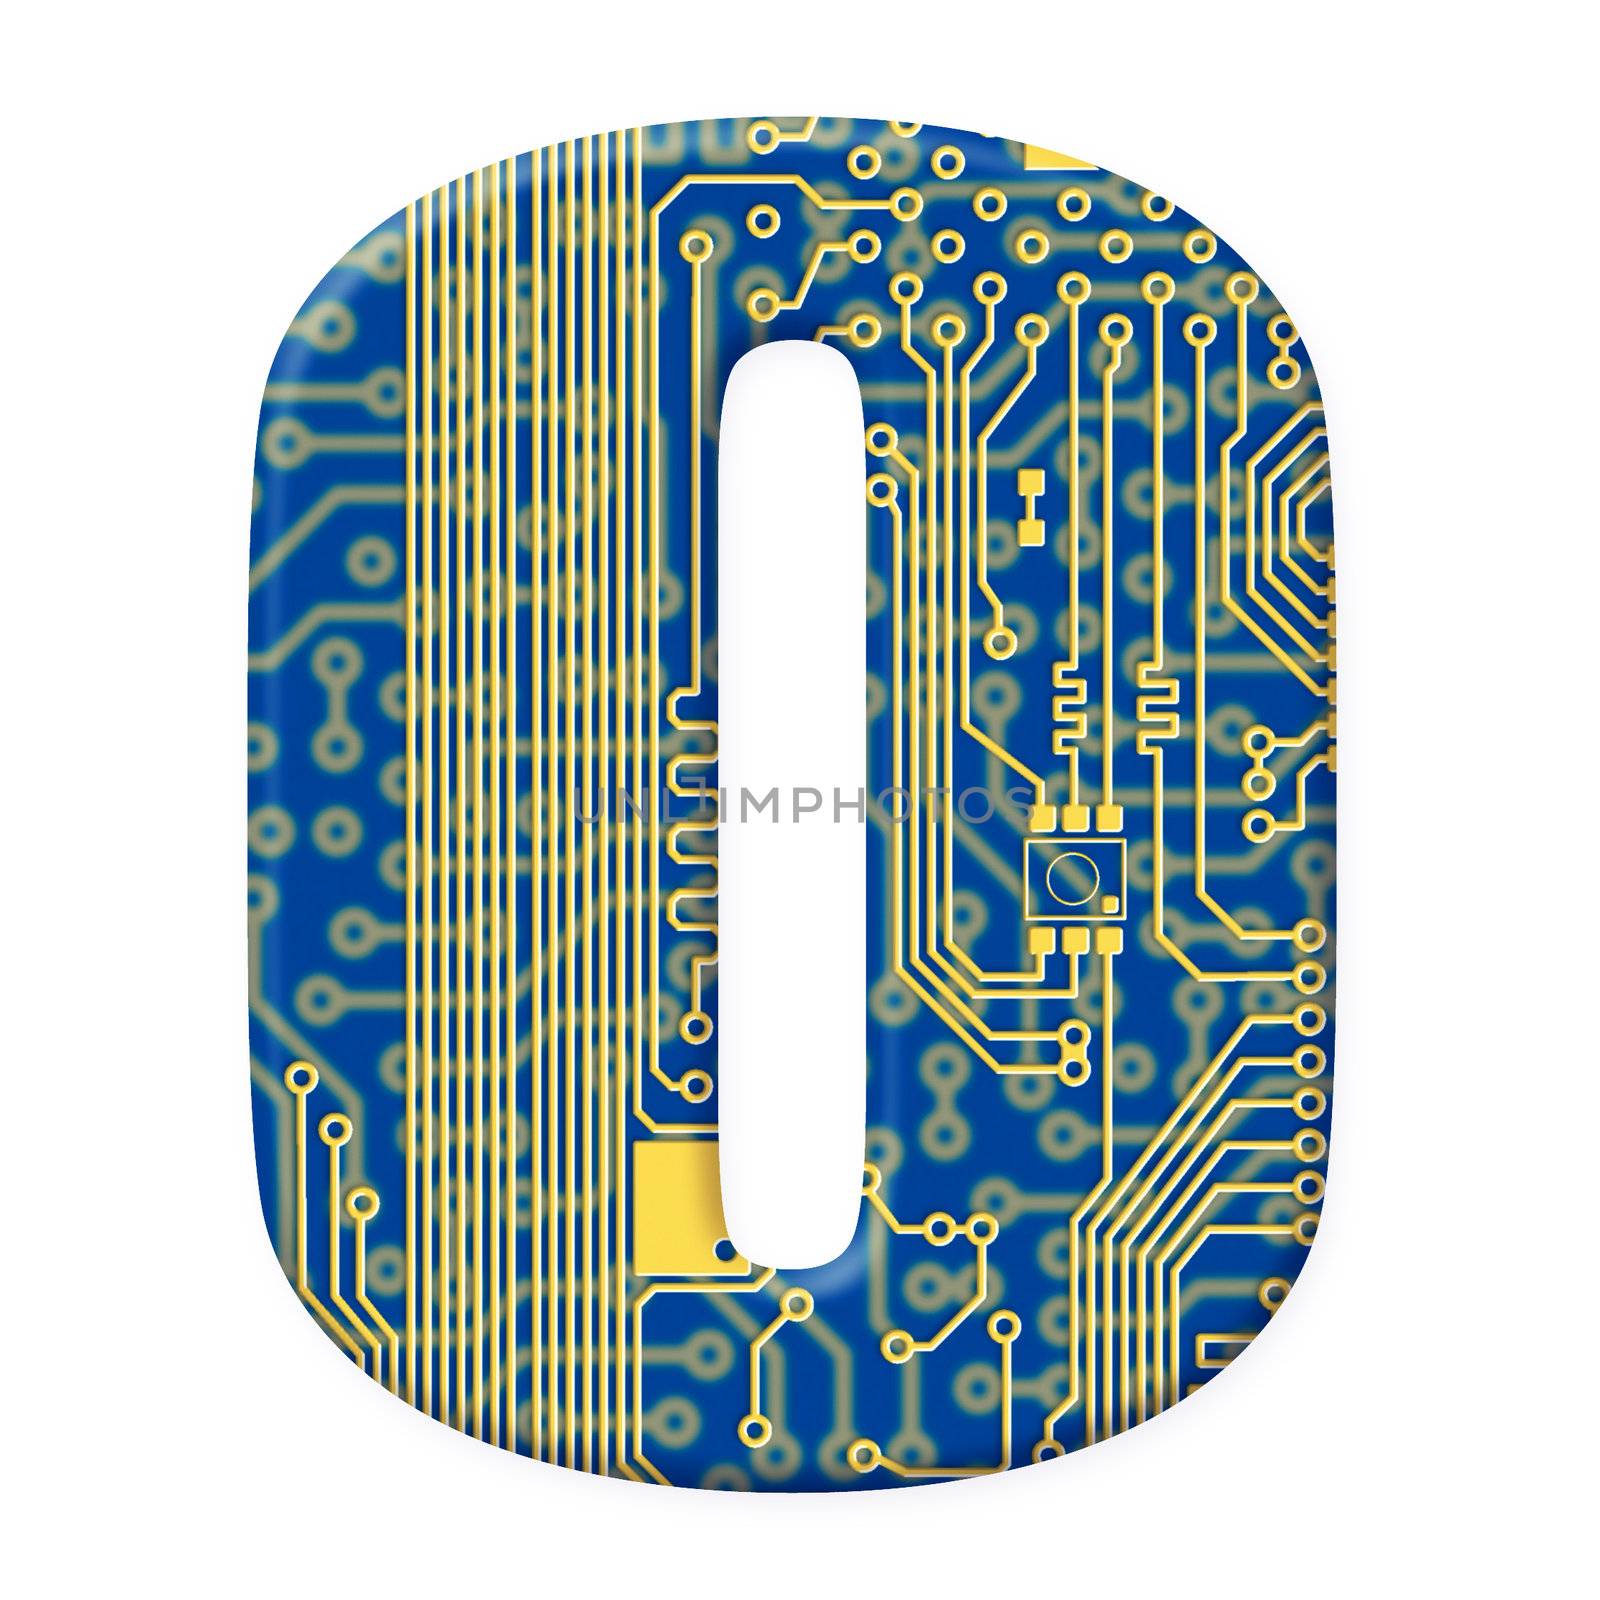 One letter from the electronic technology circuit board alphabet on a white background - O